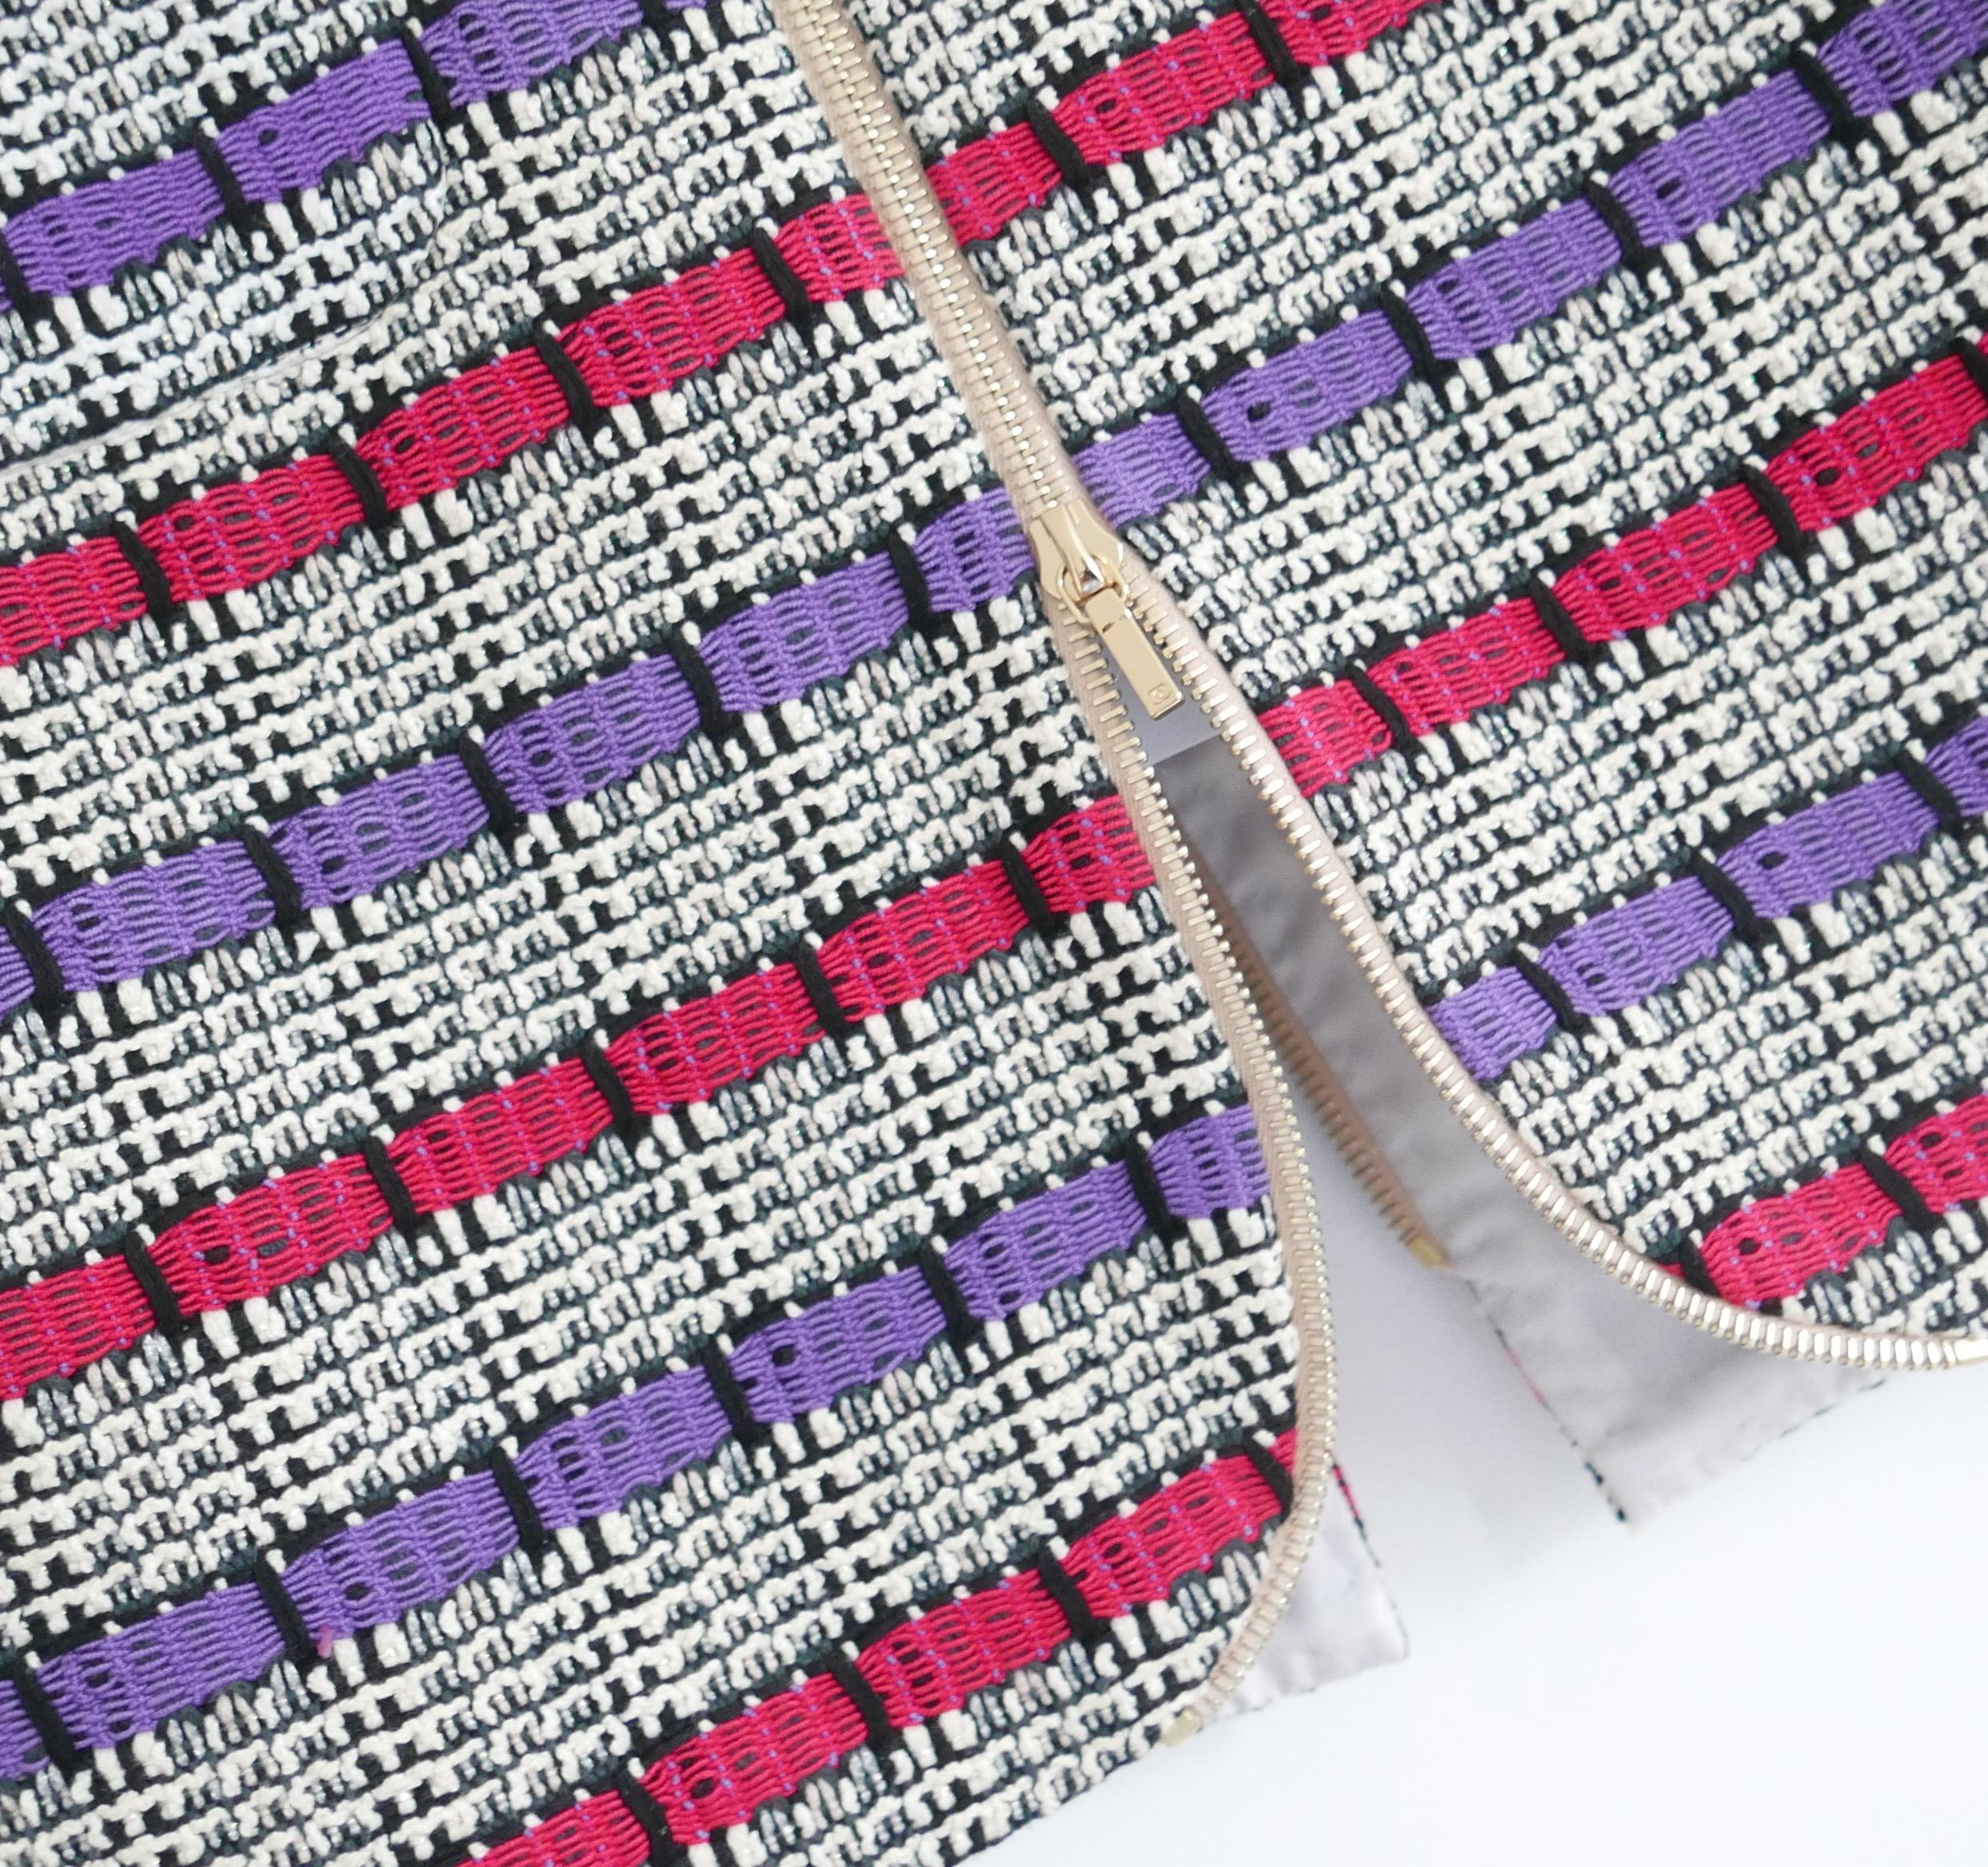 Totally fabulous Chanel skirt - from the Spring/Summer 2017 17S collection. Bought for £2700 and new with spare fabric/tag attached. 

Superbly crafted from chunky cotton/acrylic mix black and white tweed with pink and purple textured stripes. It